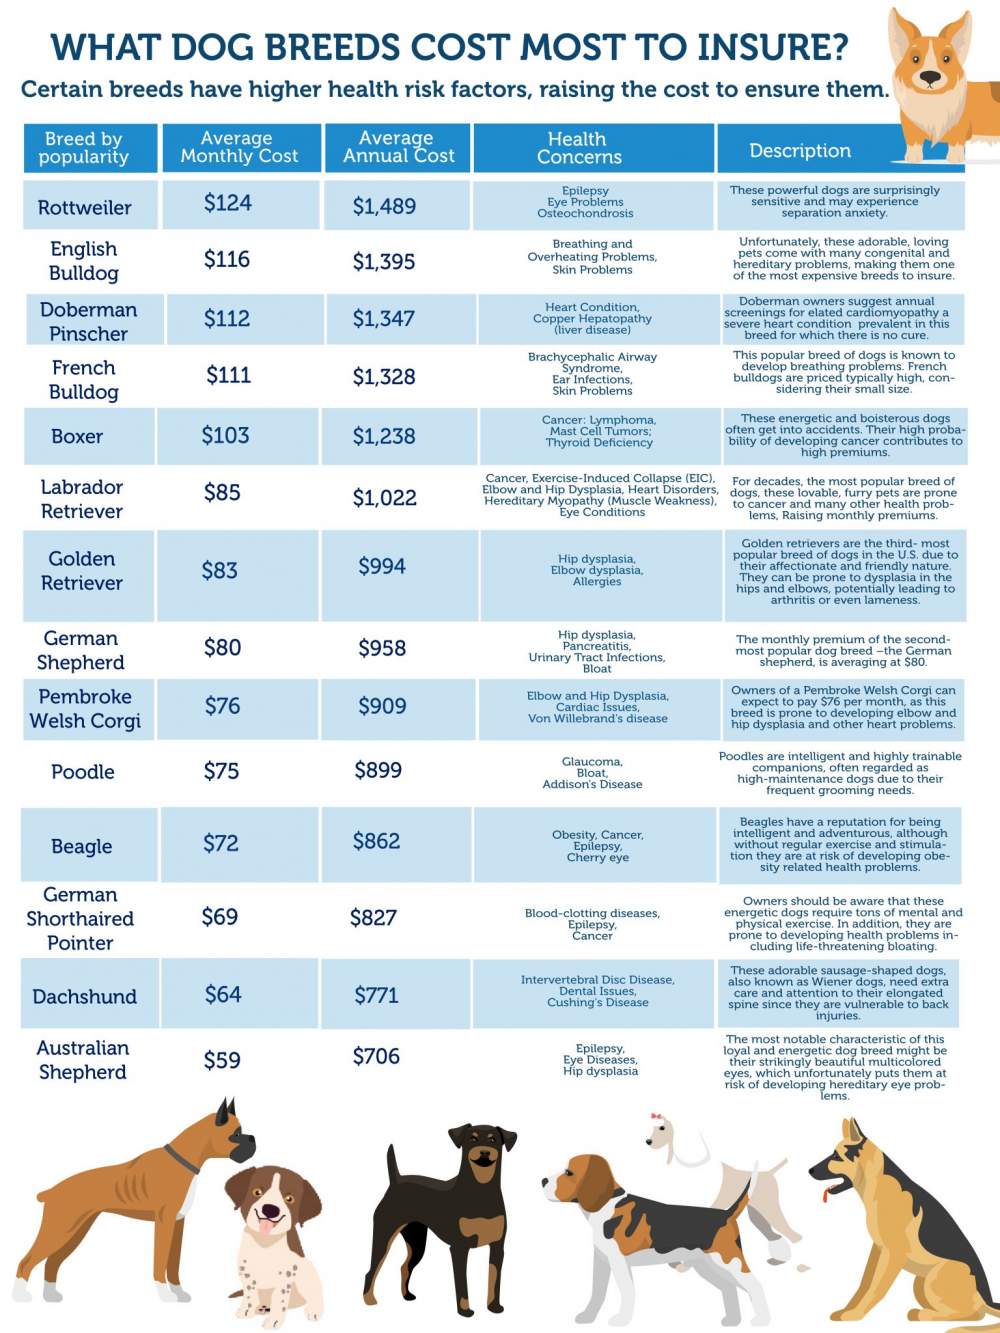 What Dog Breeds Cost Most to Insure